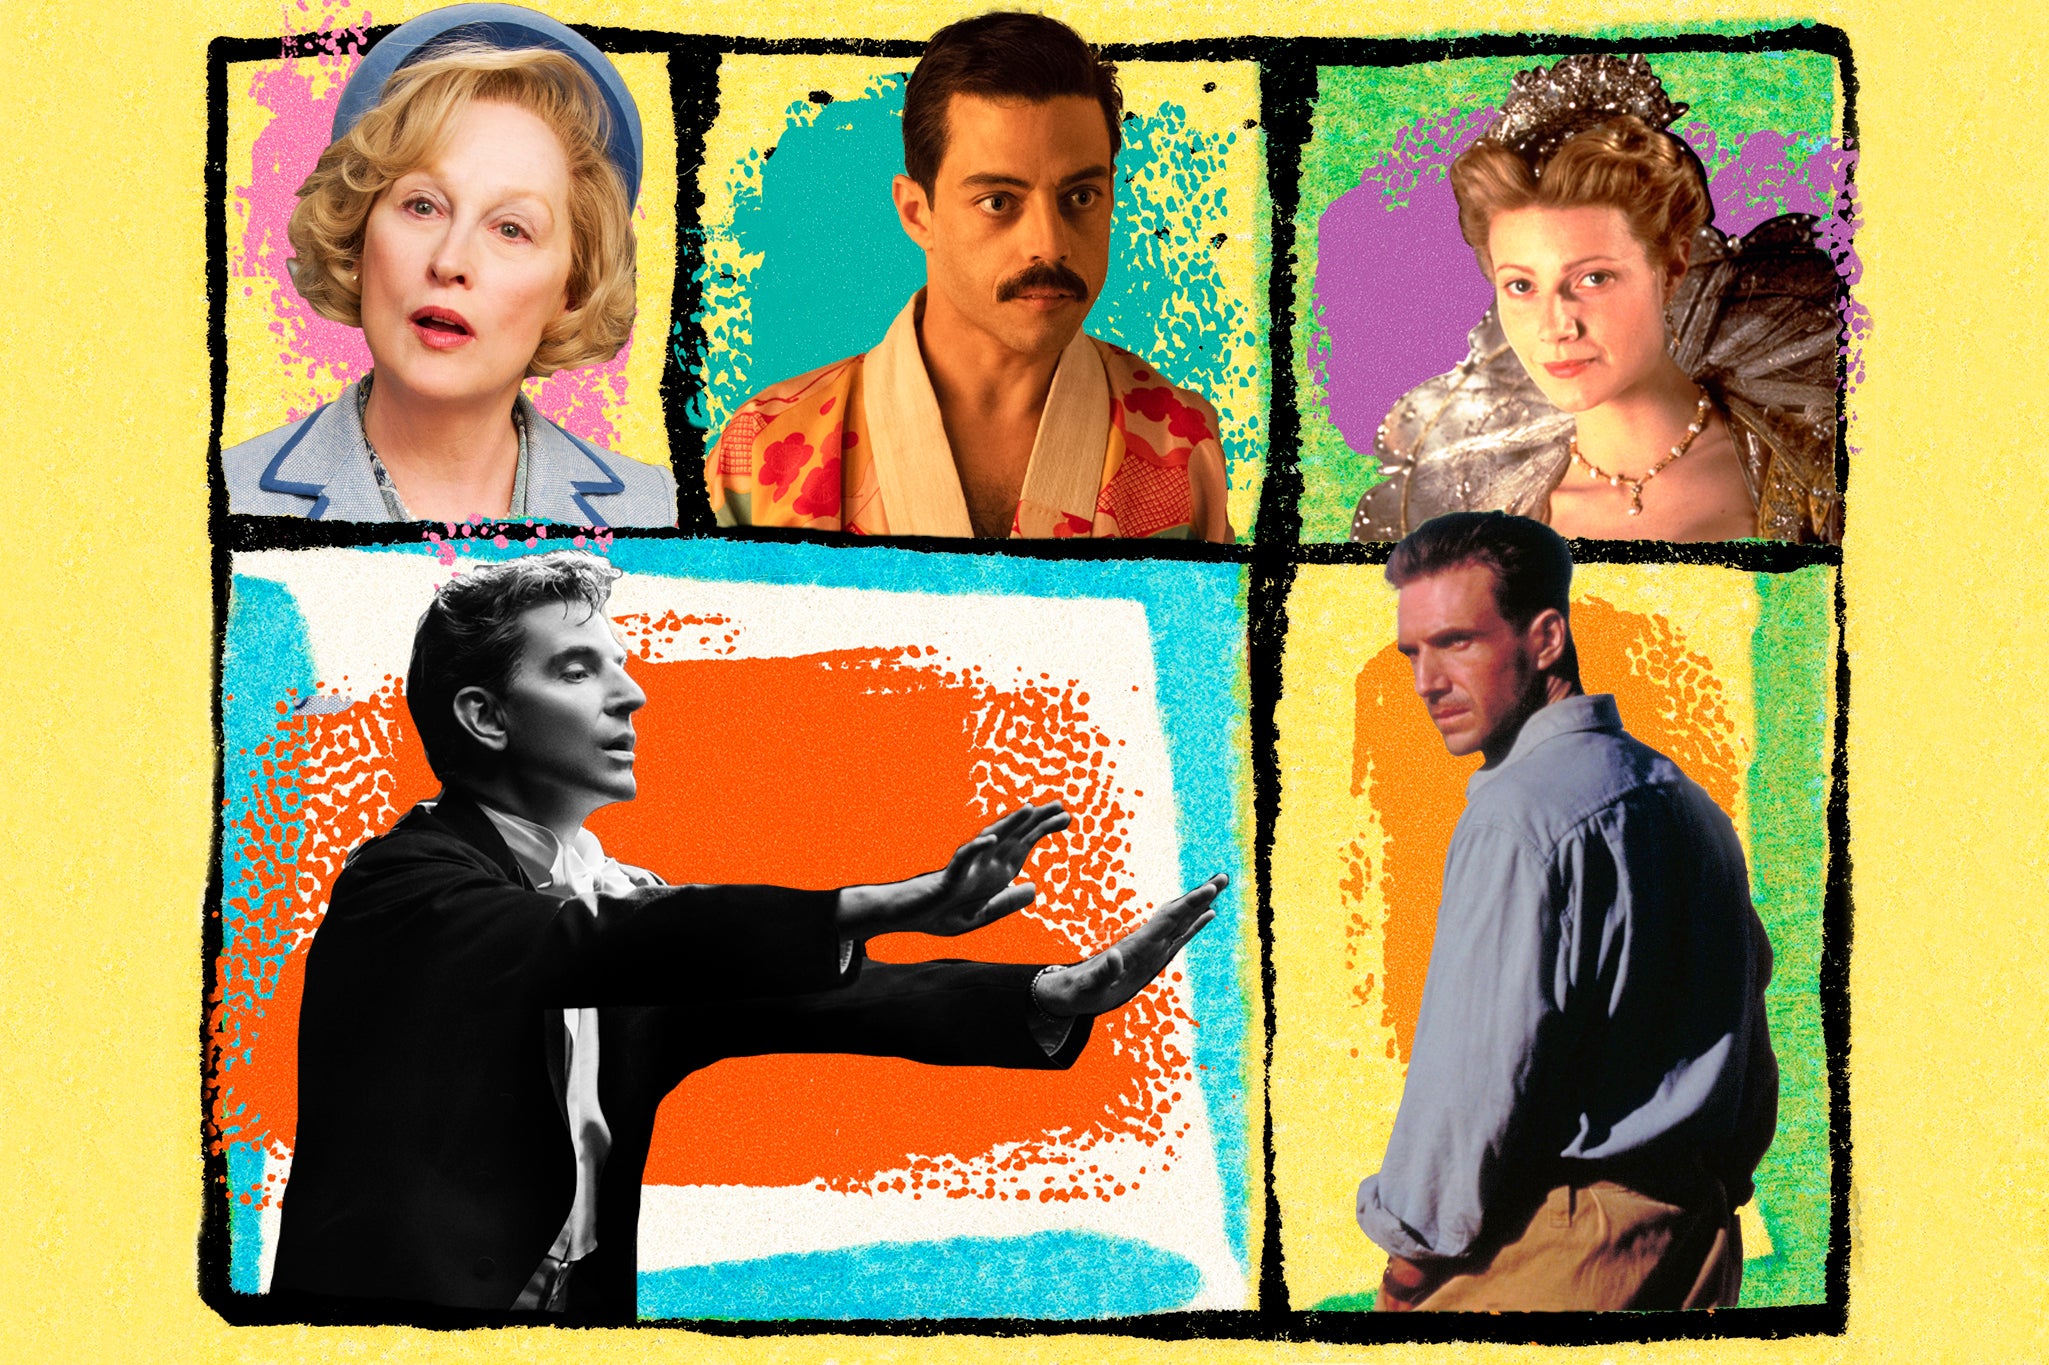 Survival of the baitiest: ‘Shakespeare in Love’, ‘The English Patient’, ‘Maestro’, ‘The Iron Lady’ and ‘Bohemian Rhapsody’ could all be considered awards bait